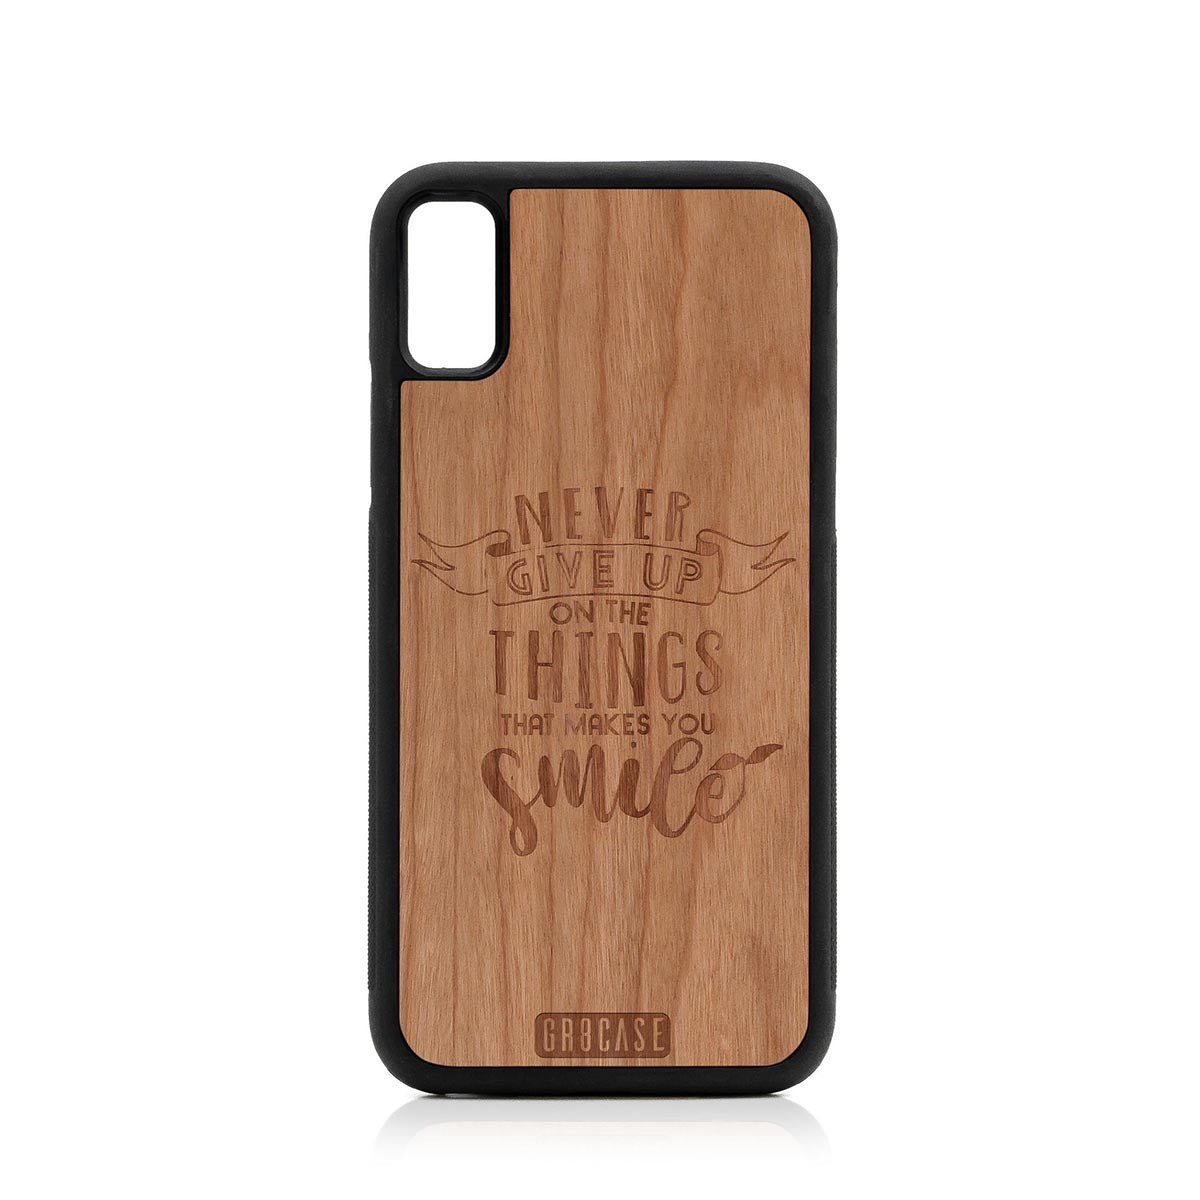 Never Give Up On The Things That Makes You Smile Design Wood Case For iPhone XS Max by GR8CASE